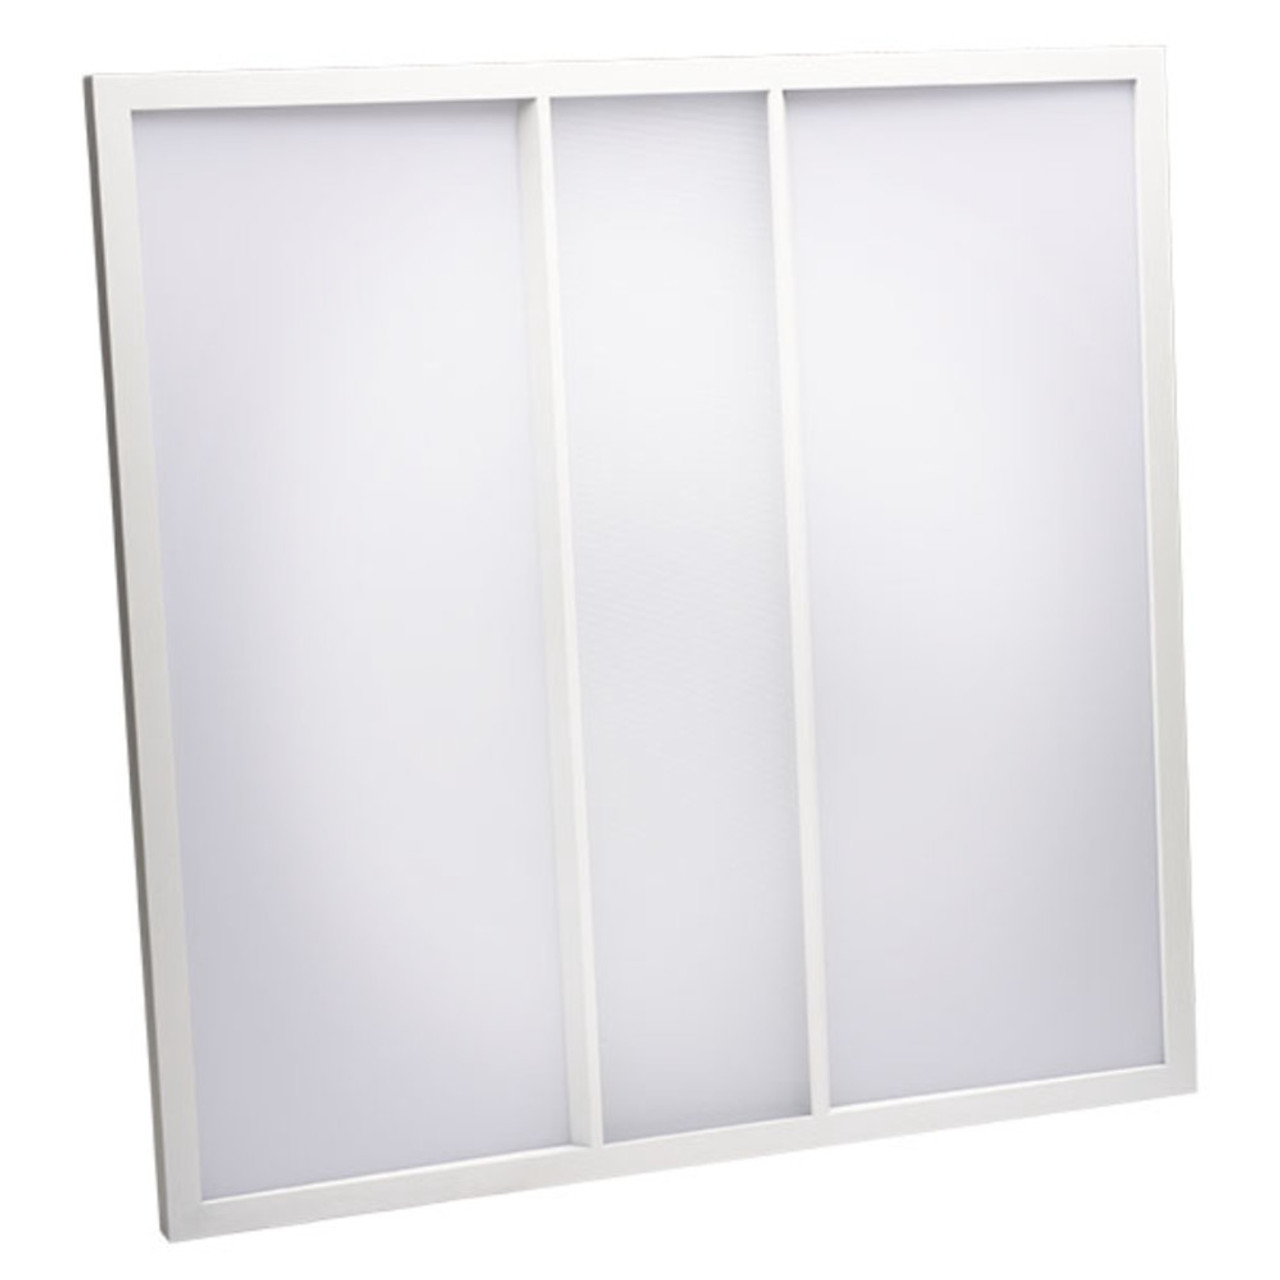 Arial T-Pro LED Panel 25W 600x600mm Changeable CCT 3/4/5000K DALI Dim